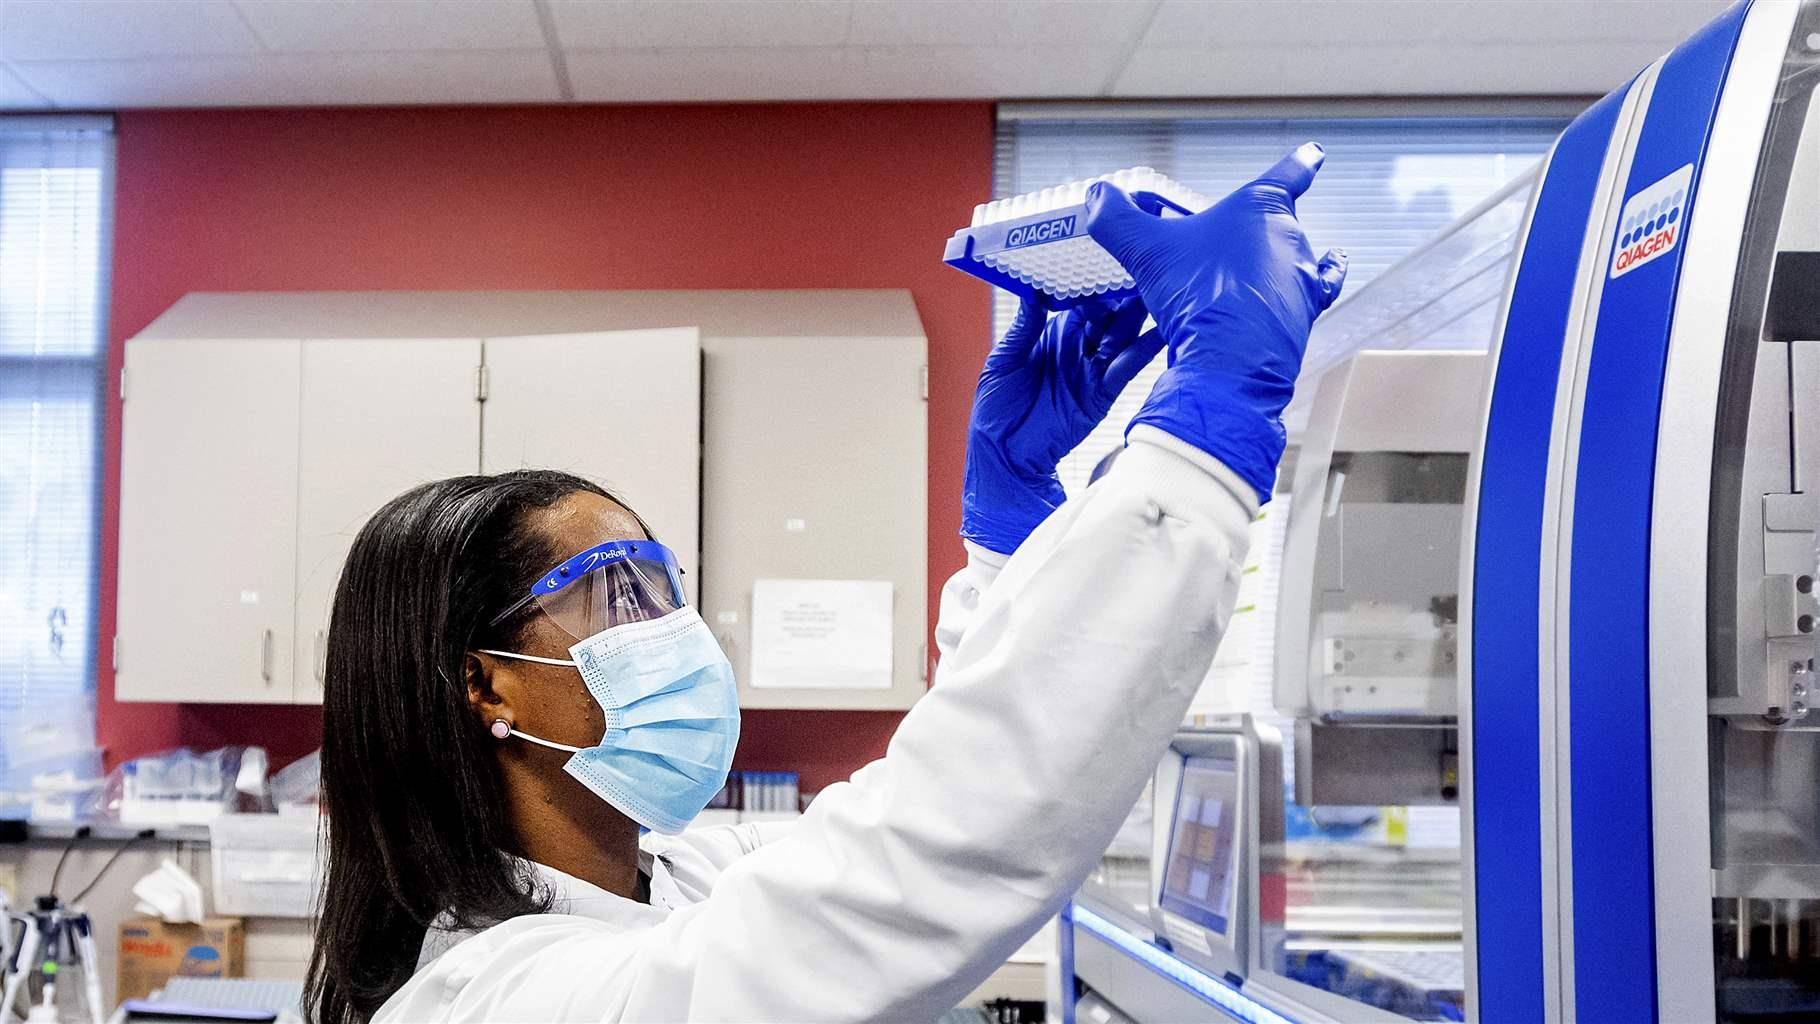 Clinical lab scientist Selam Bihon processes upper respiratory samples from patients suspected of having COVID-19 at the Stanford Clinical Virology Laboratory on Wednesday, Feb. 3, 2021, in Palo Alto, Calif.